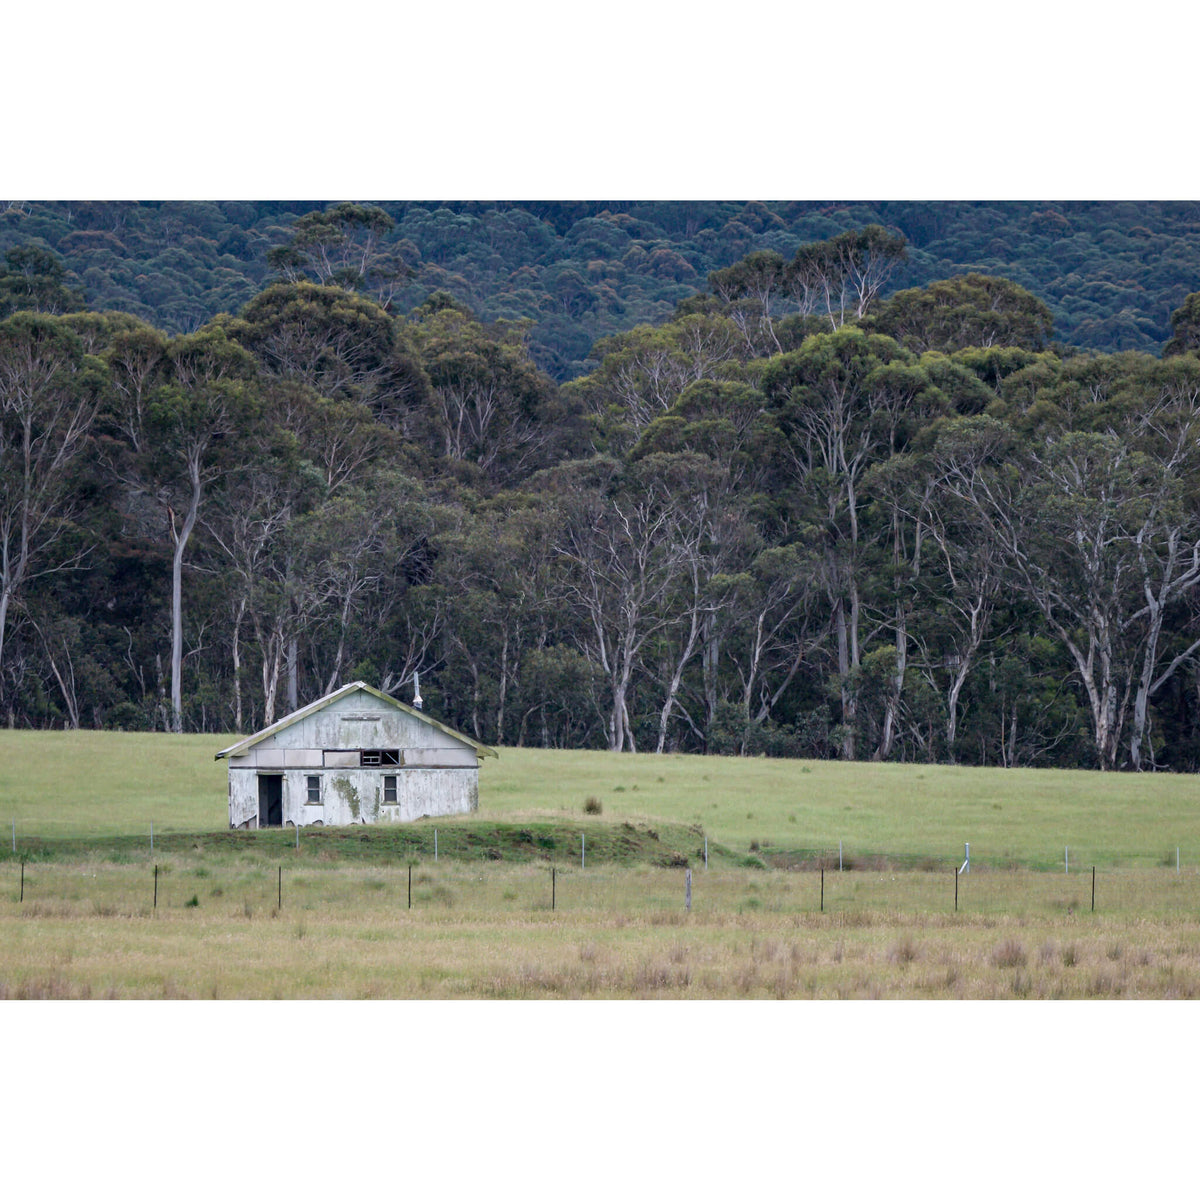 Nimmitabel Shed | The Woolshed